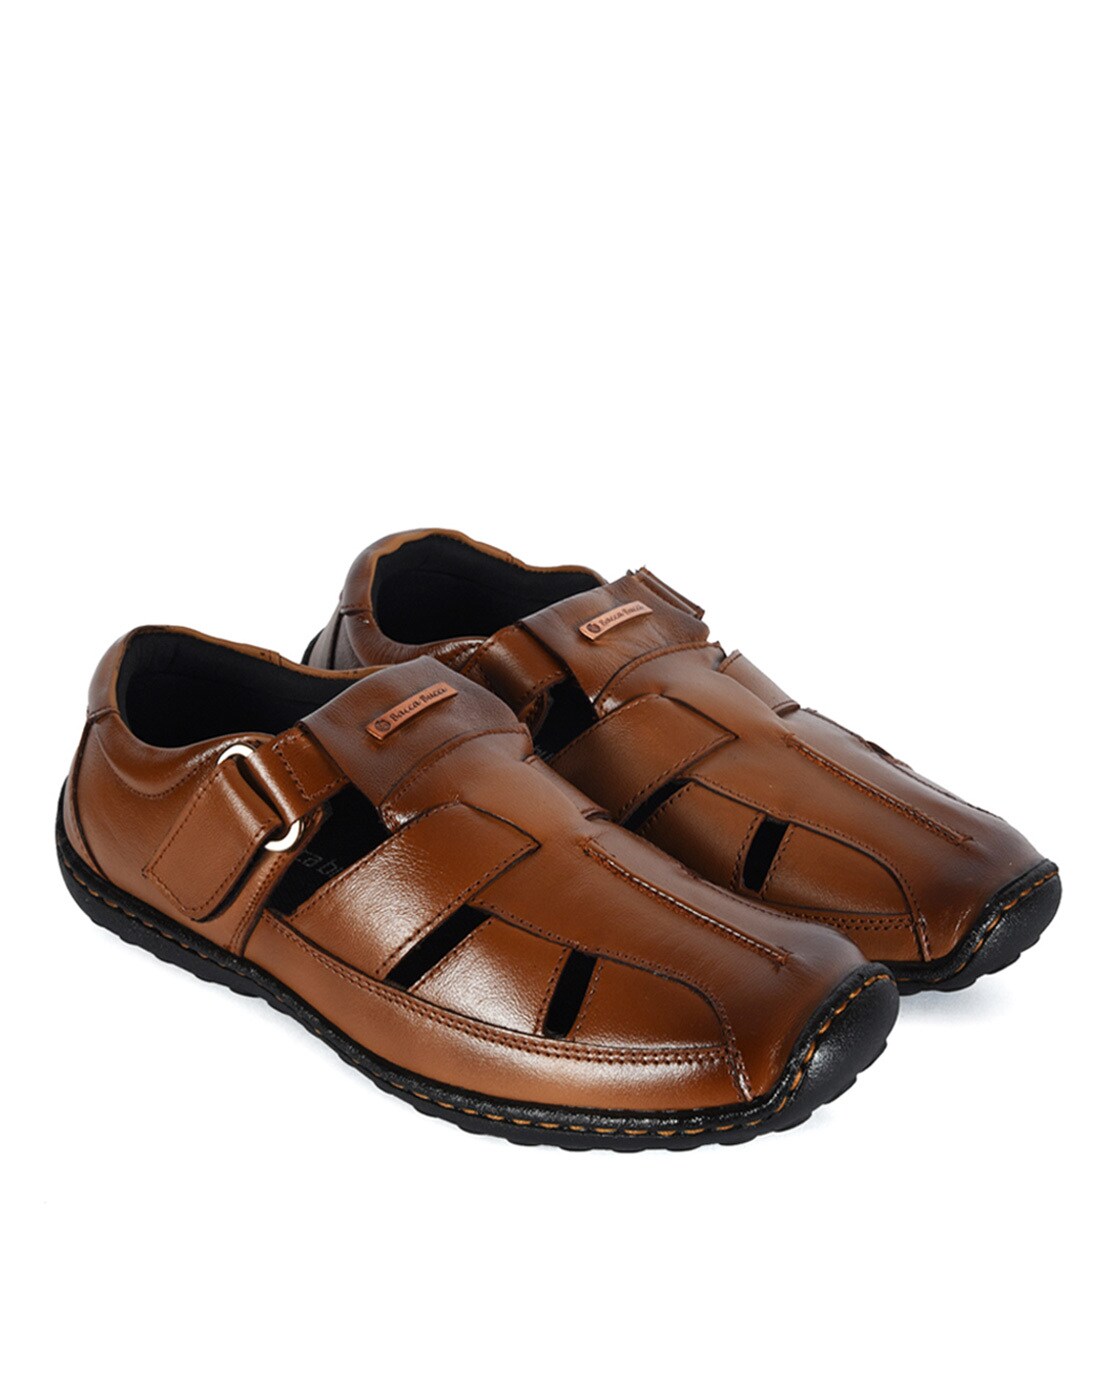 Buy Tan brown Sandals for Men by Bacca 